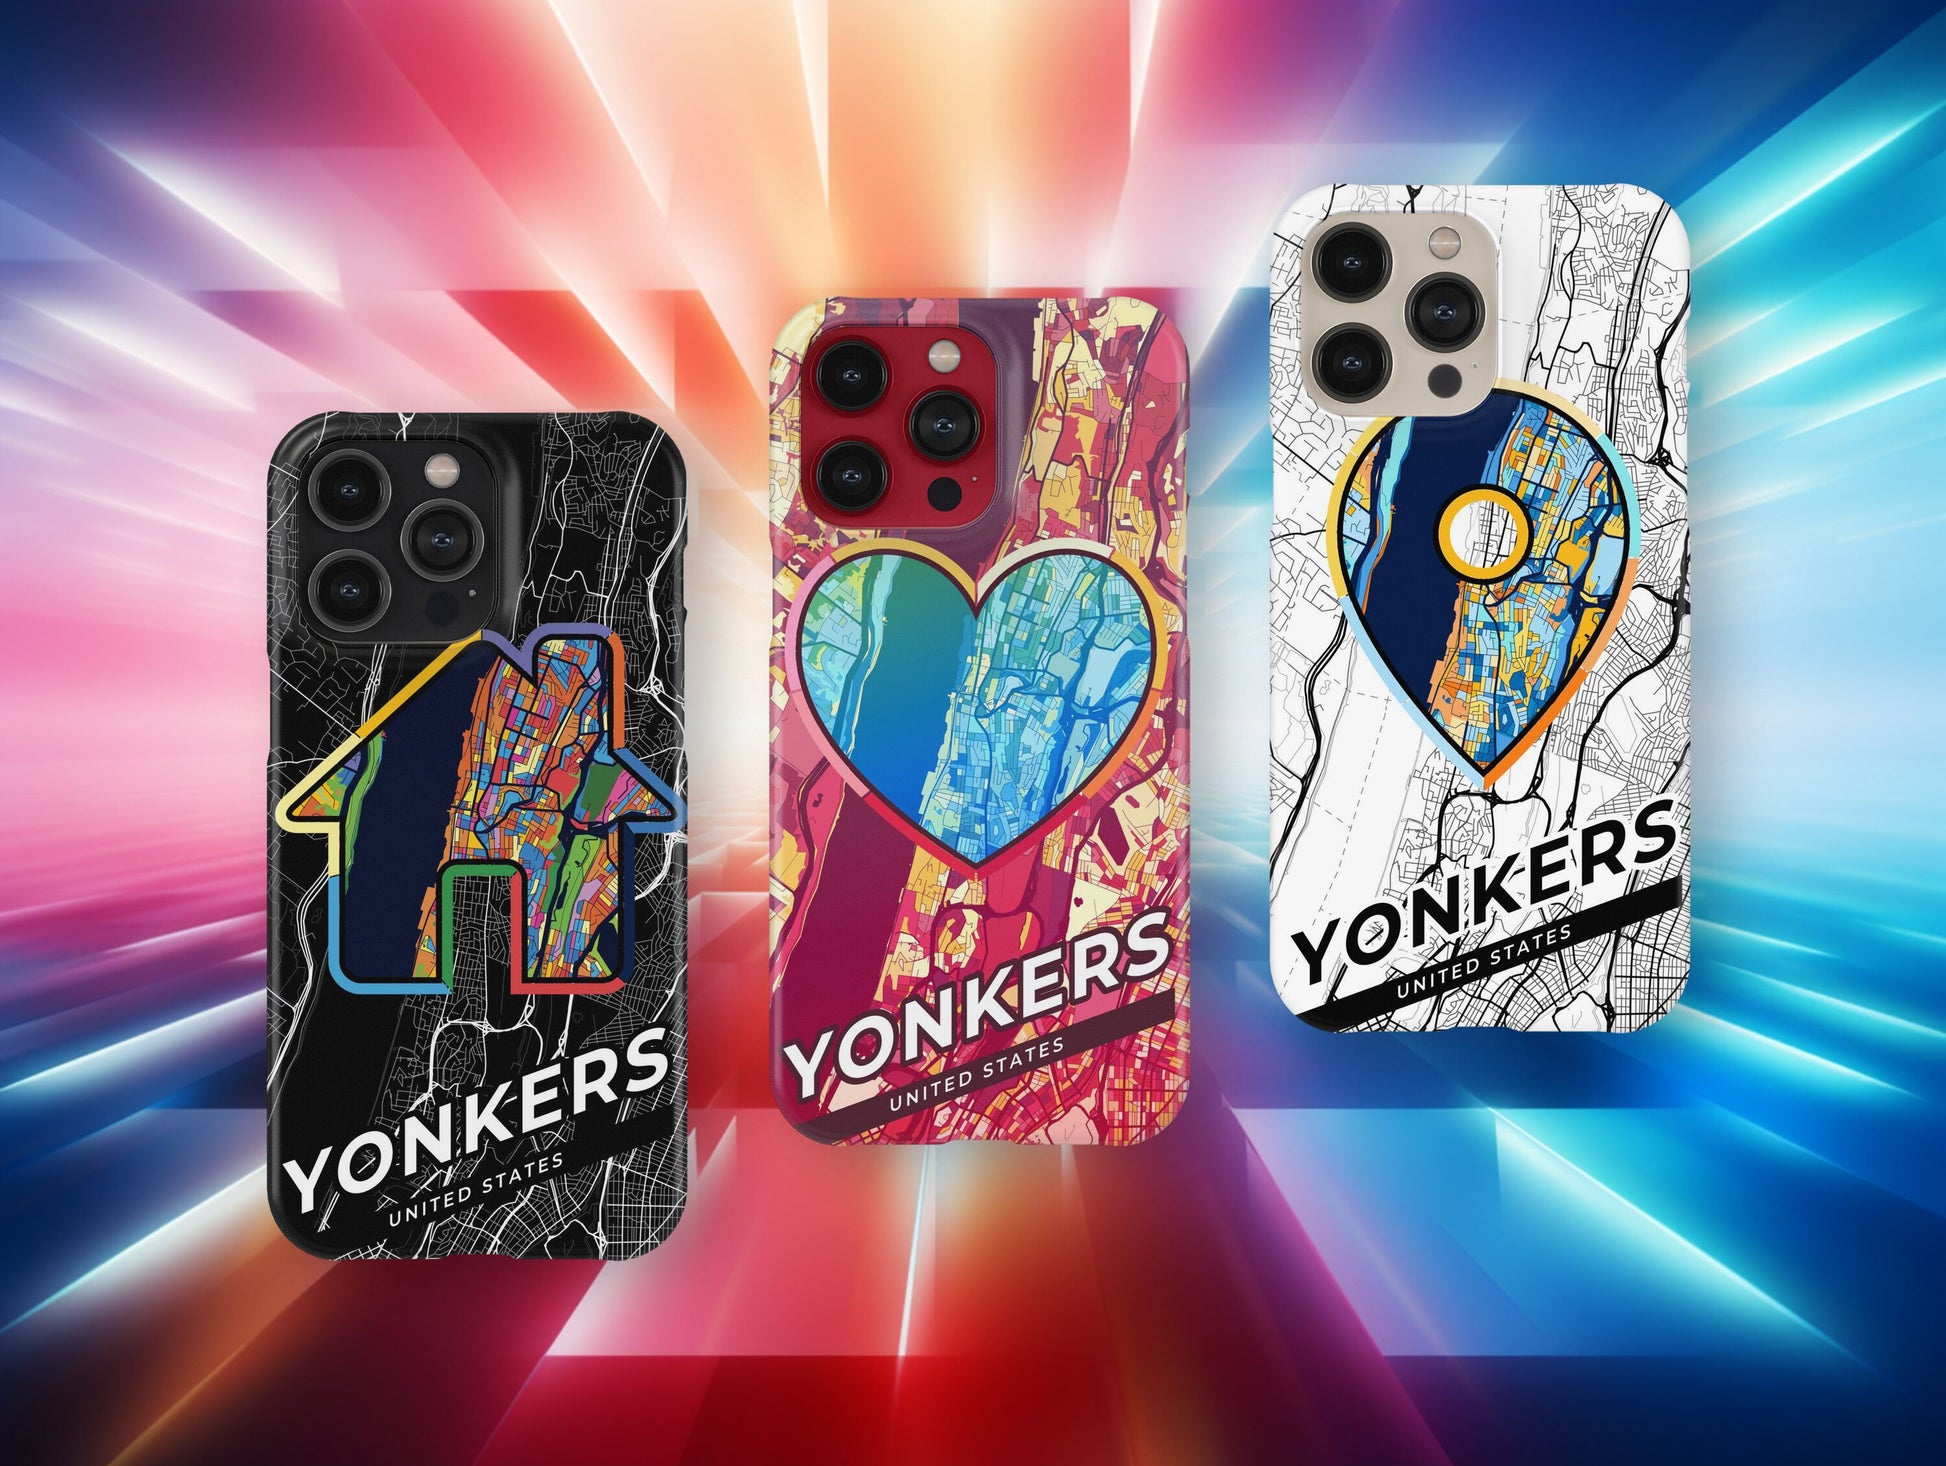 Yonkers New York slim phone case with colorful icon